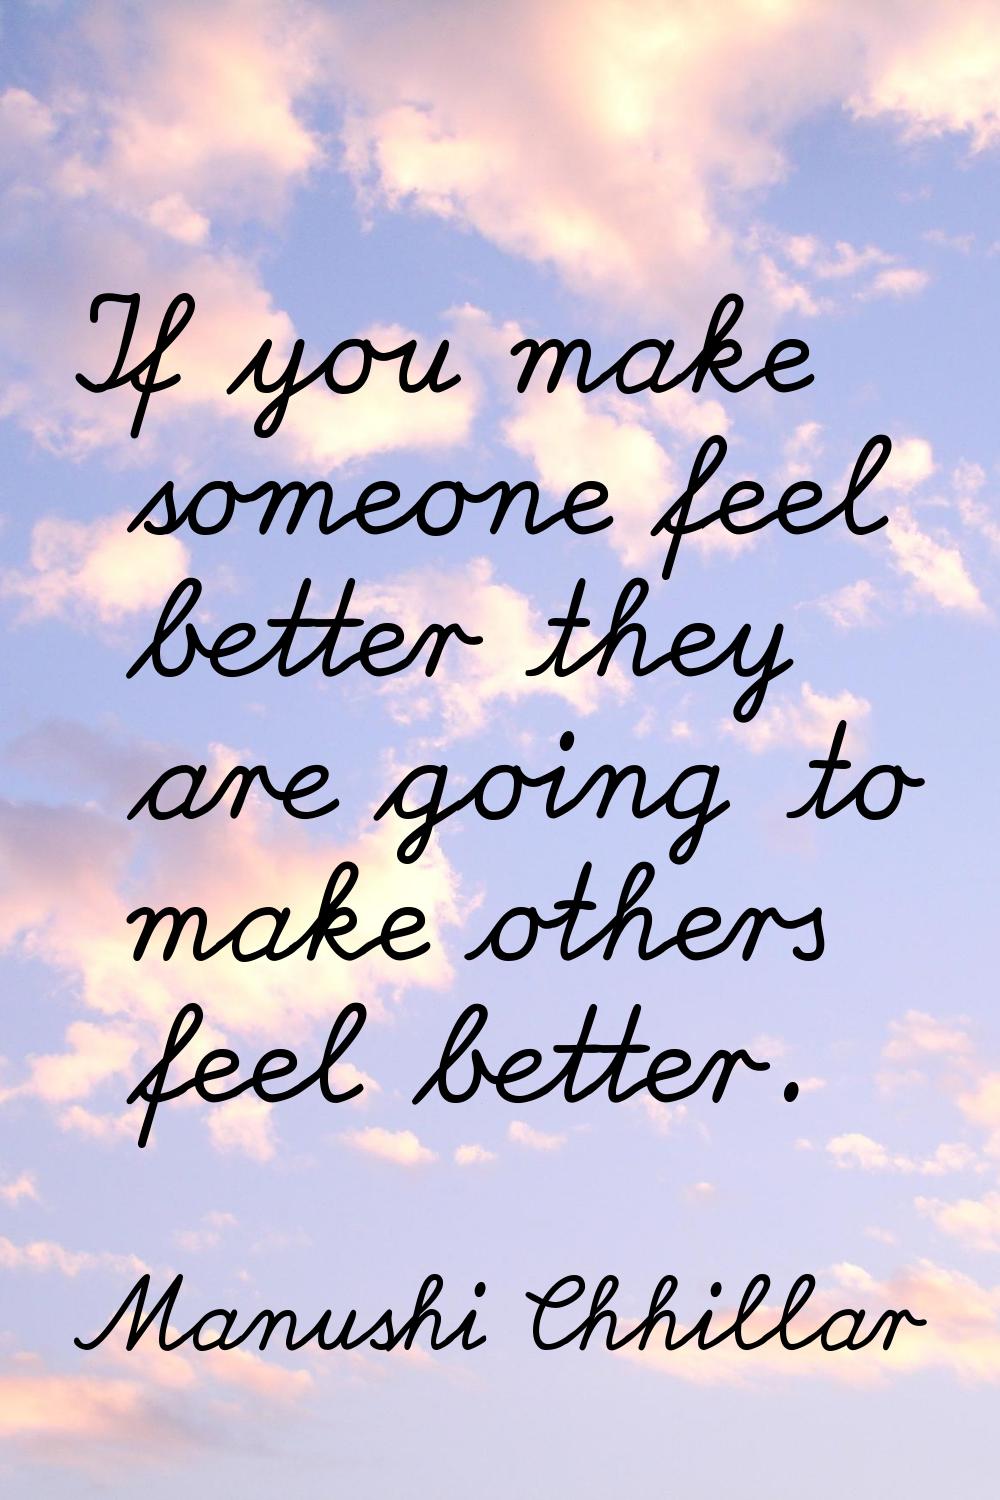 If you make someone feel better they are going to make others feel better.